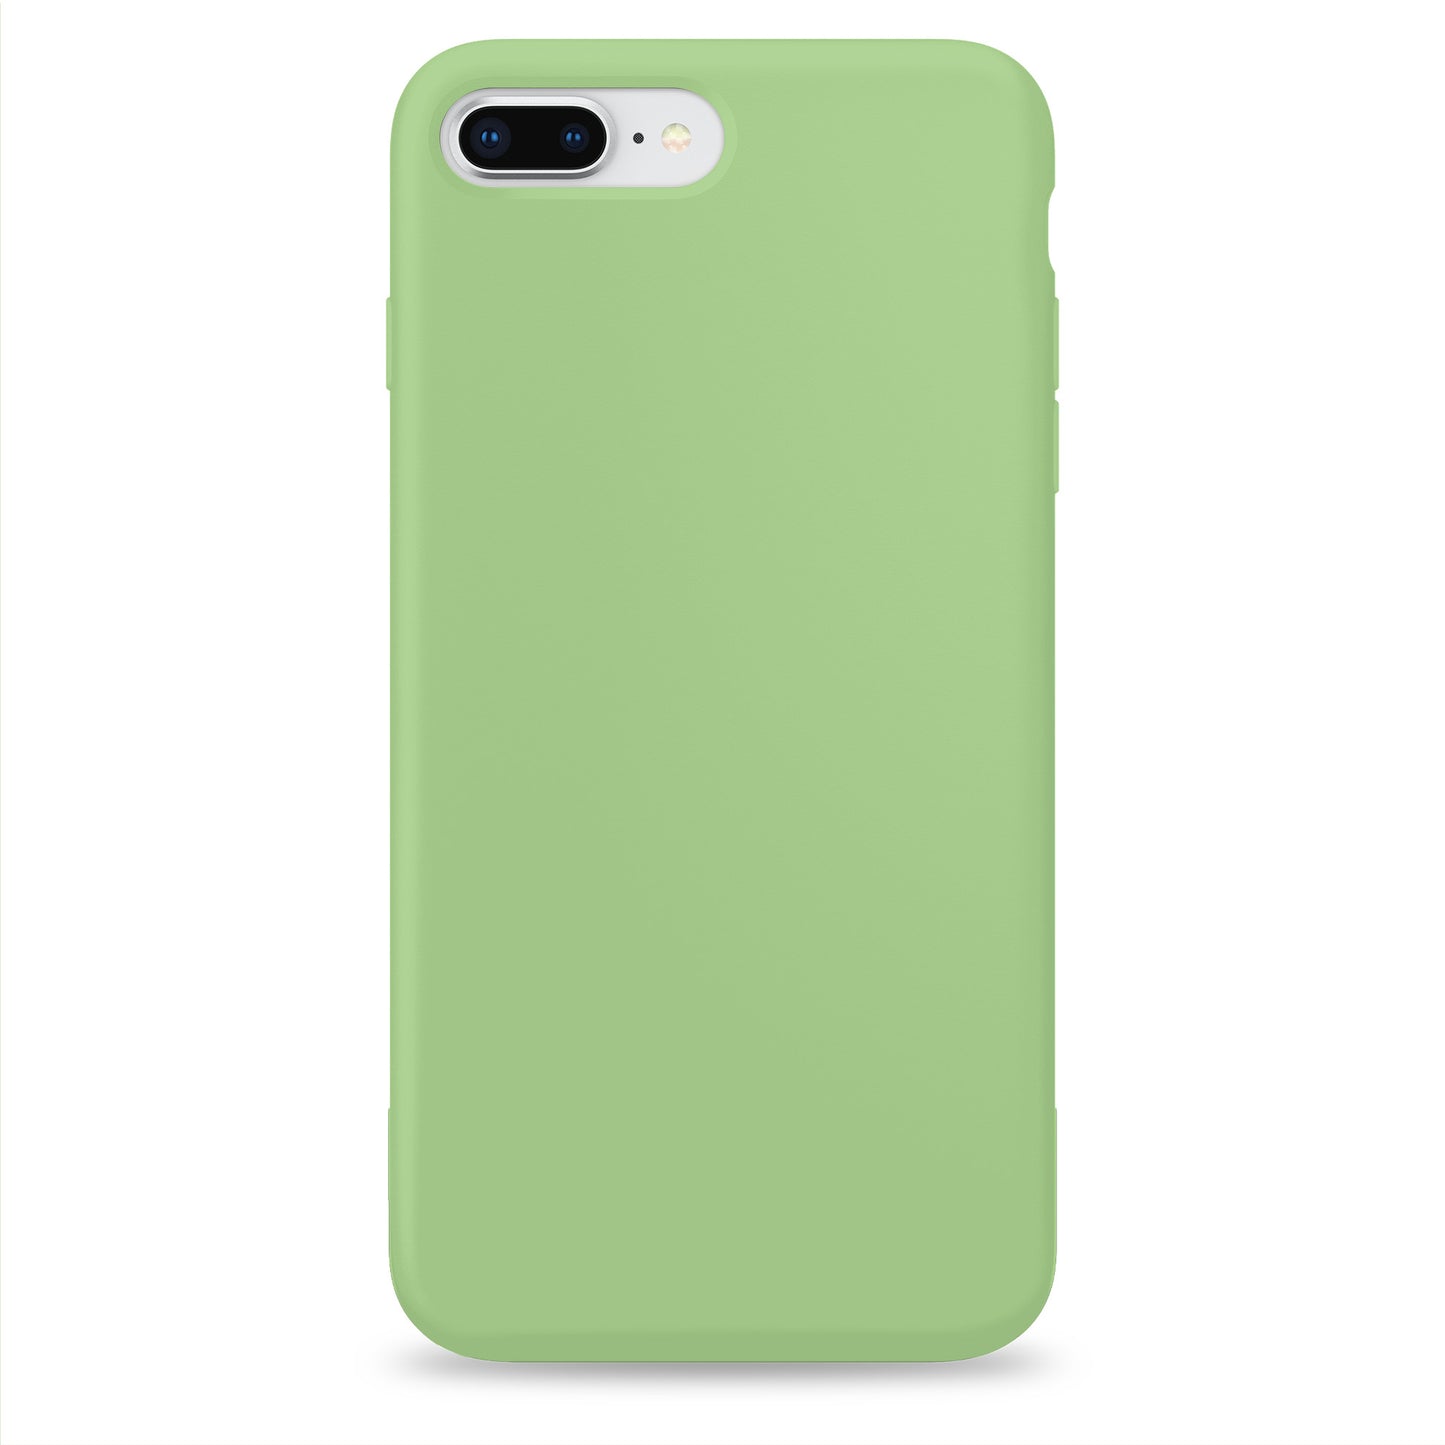 Matcha Green Silicone Case for iPhone and Samsung